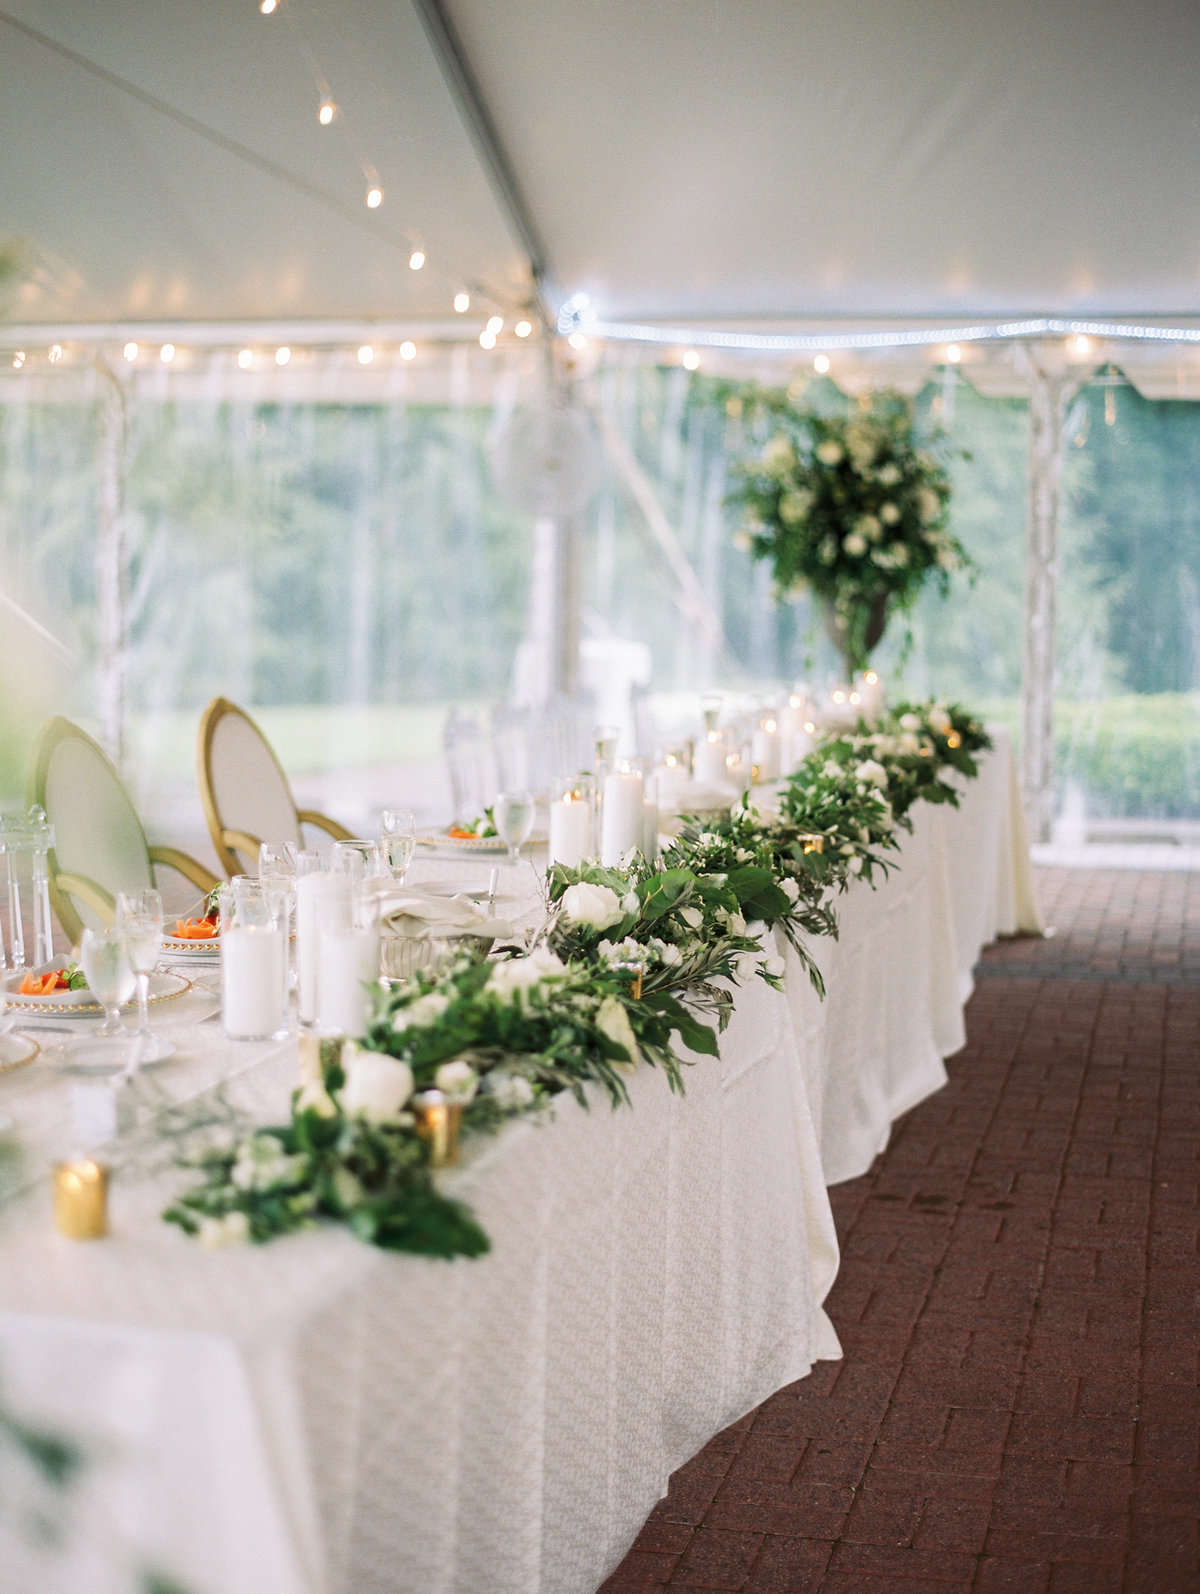 Floral garland for the reception head table